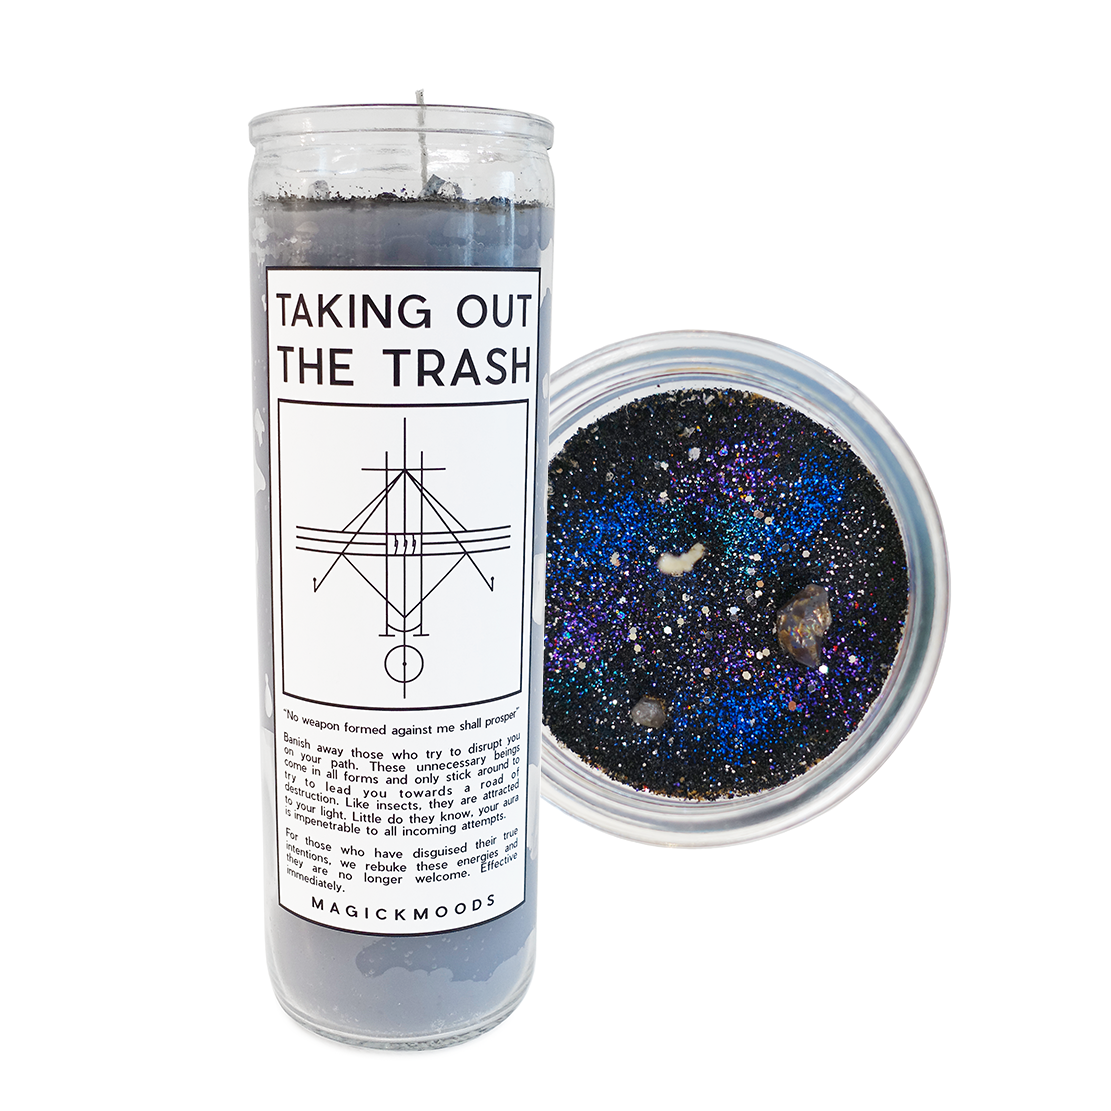 Taking Out The Trash 7-Day Meditation Candle - PREORDER - Ships by July 28th, 2023